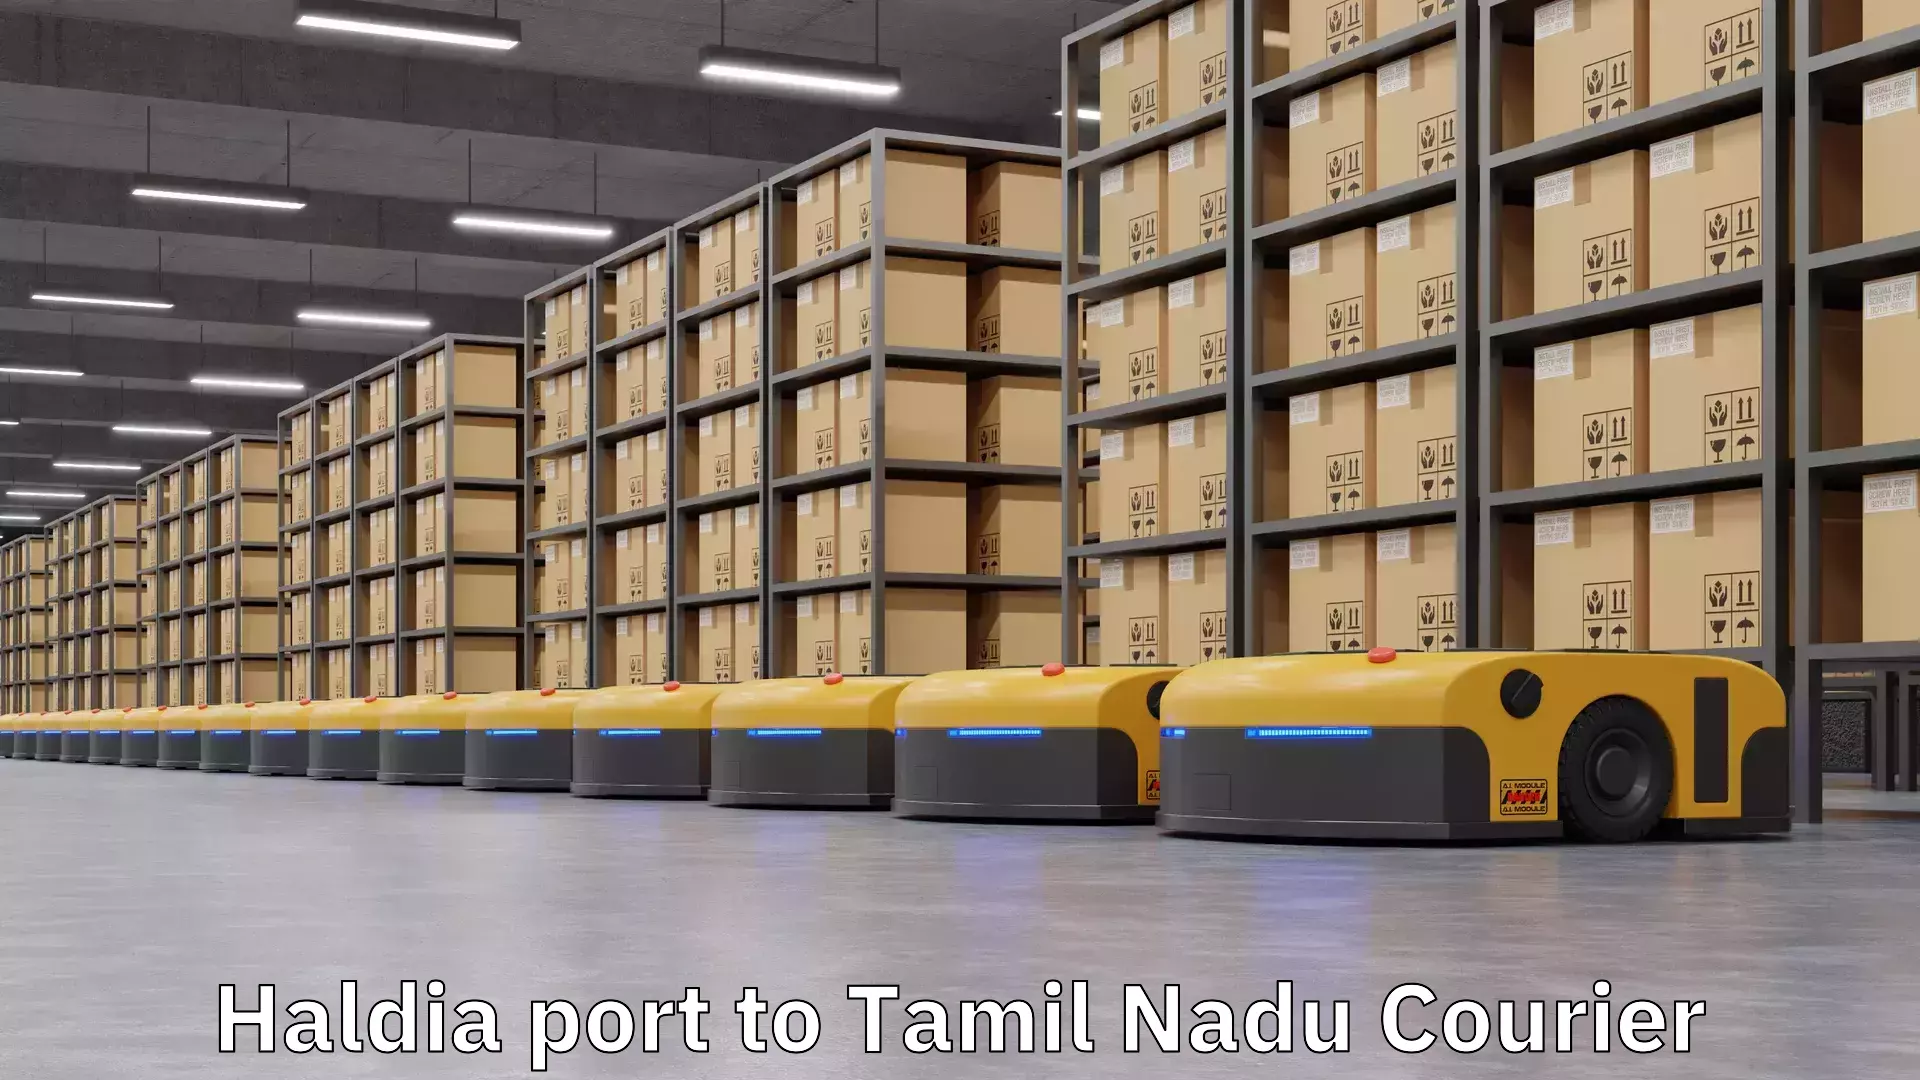 Cost-effective freight solutions Haldia port to Tamil Nadu